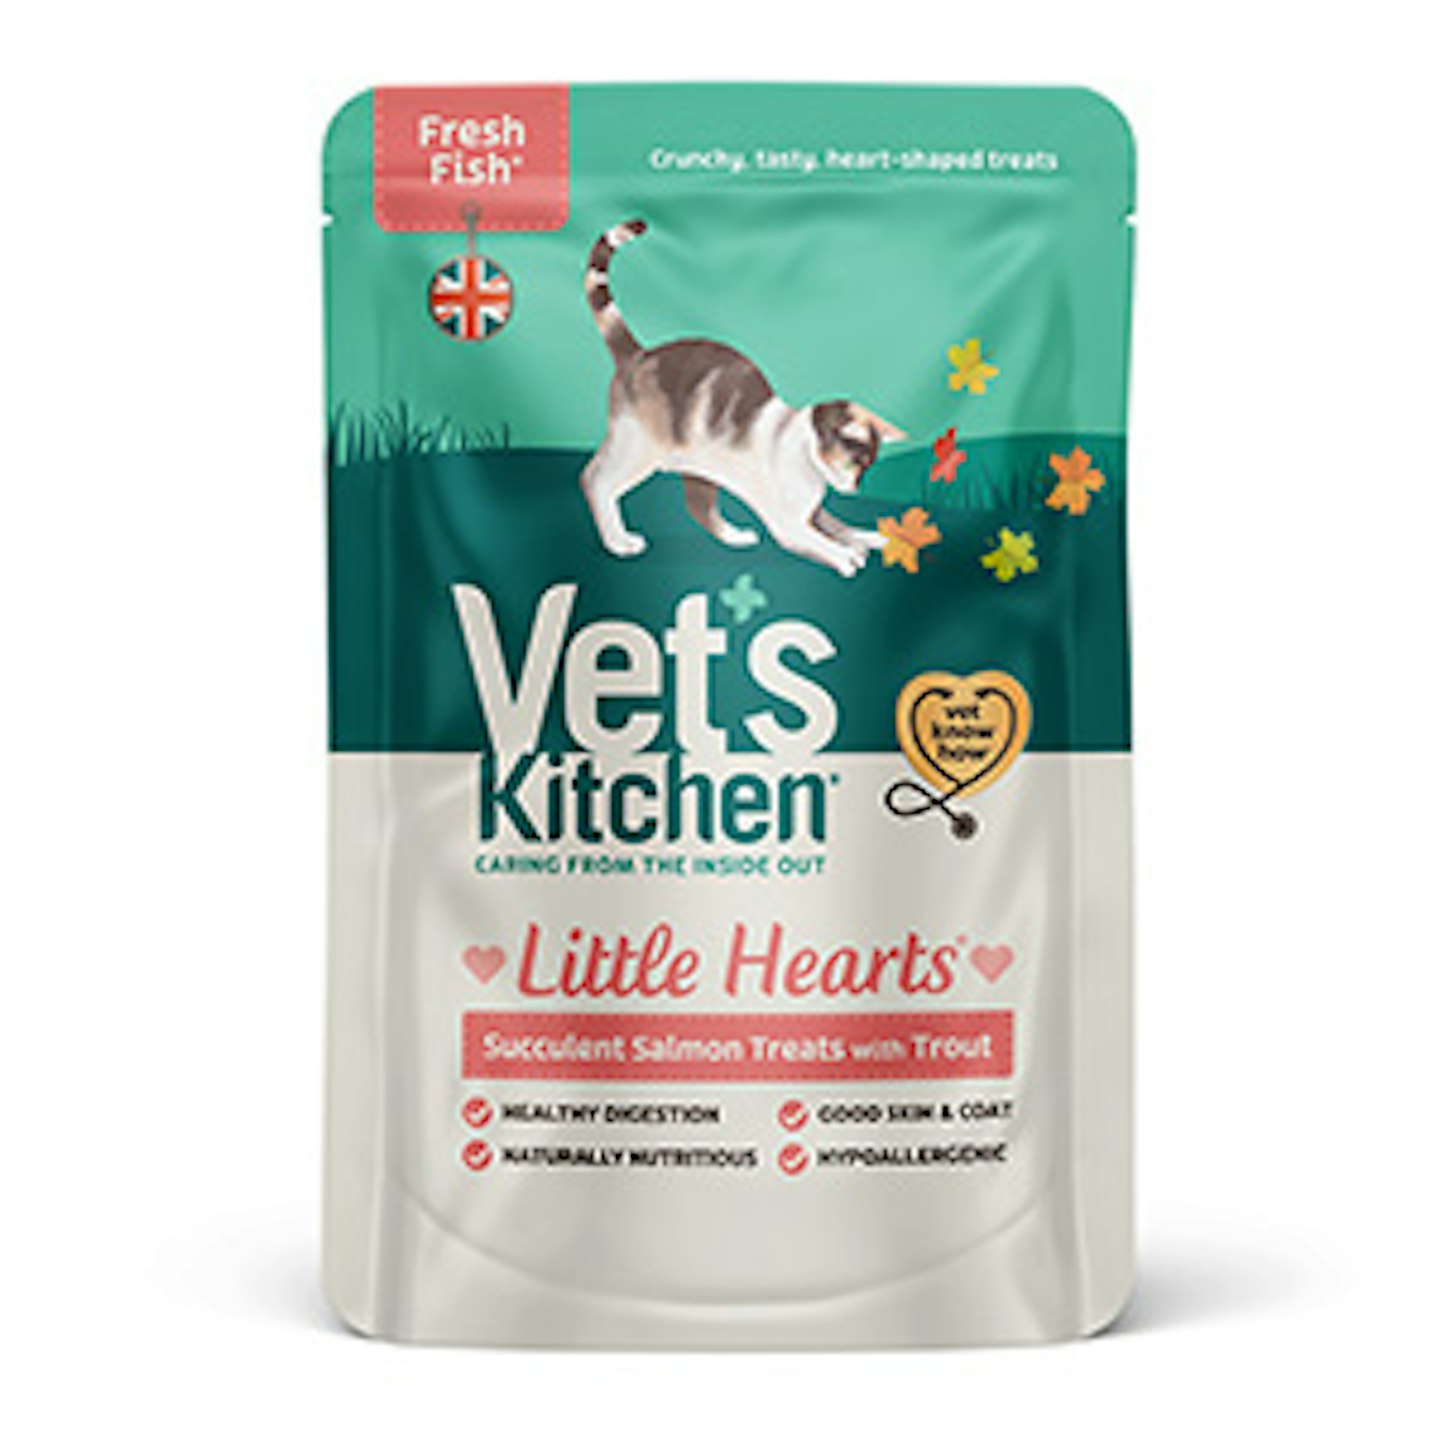 Vet's Kitchen Little Hearts Finest Salmon and Trout 60g